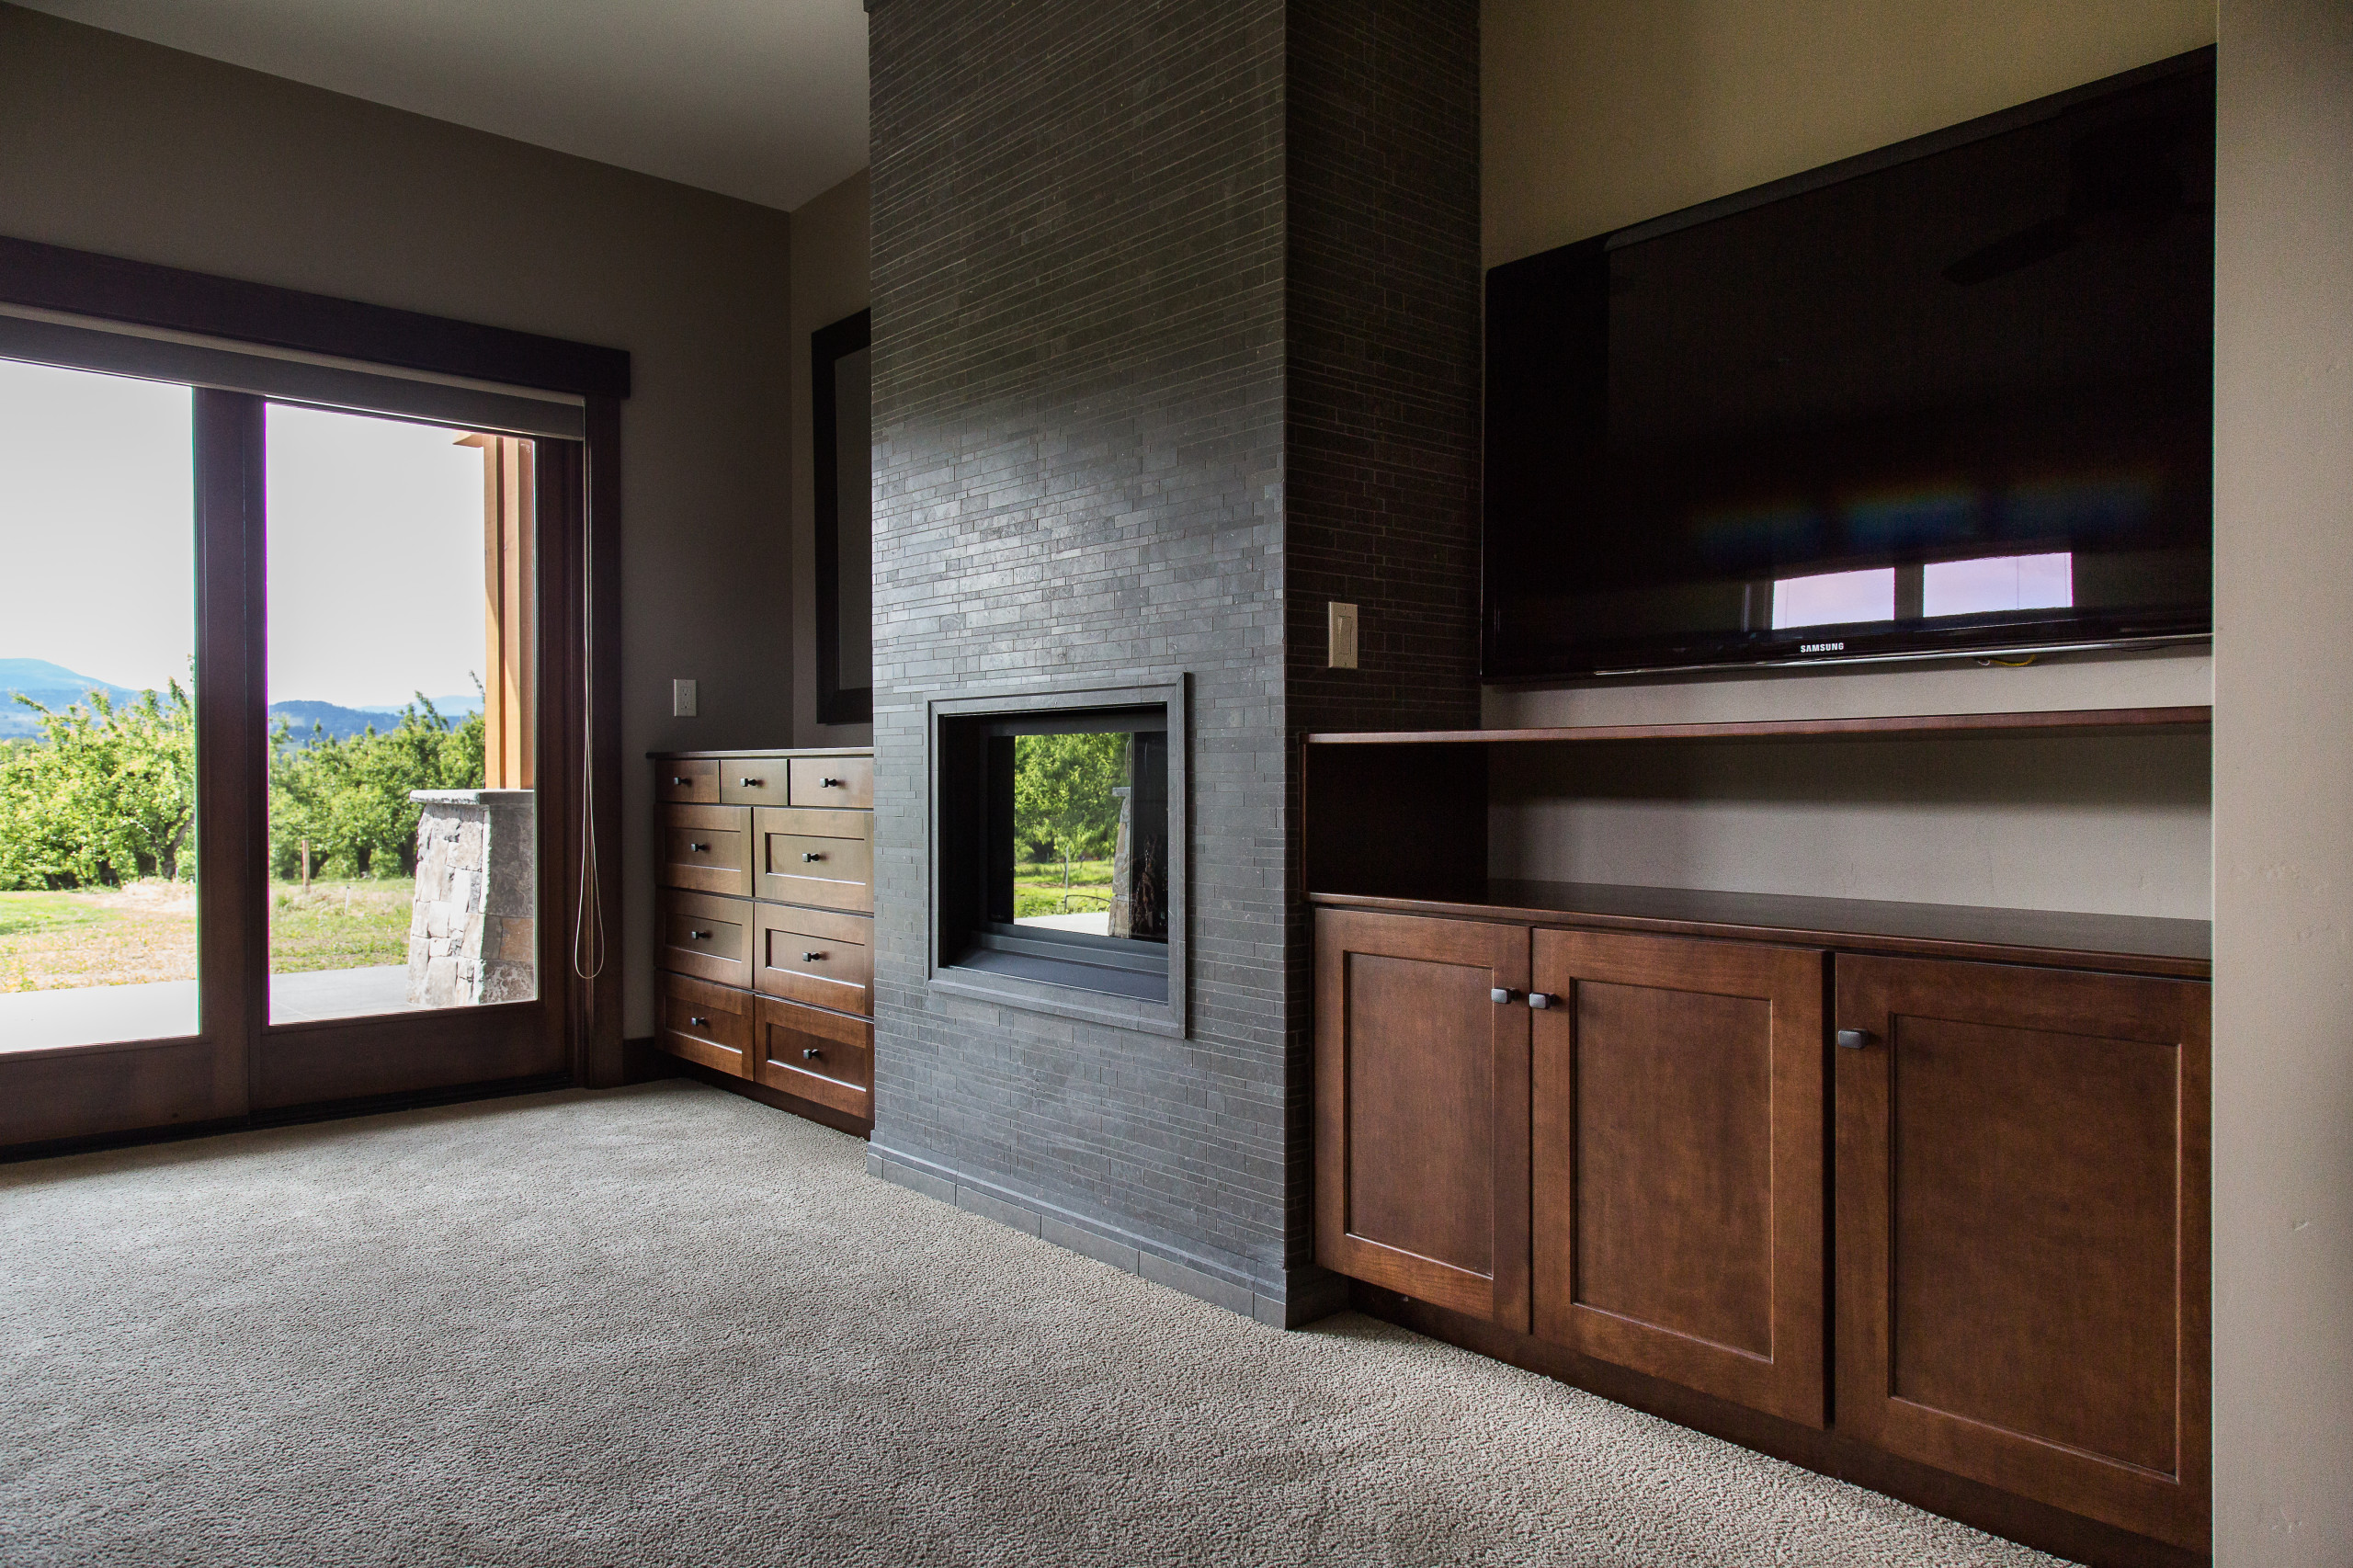 Family Room Cabinetry Shifts Focus from TV